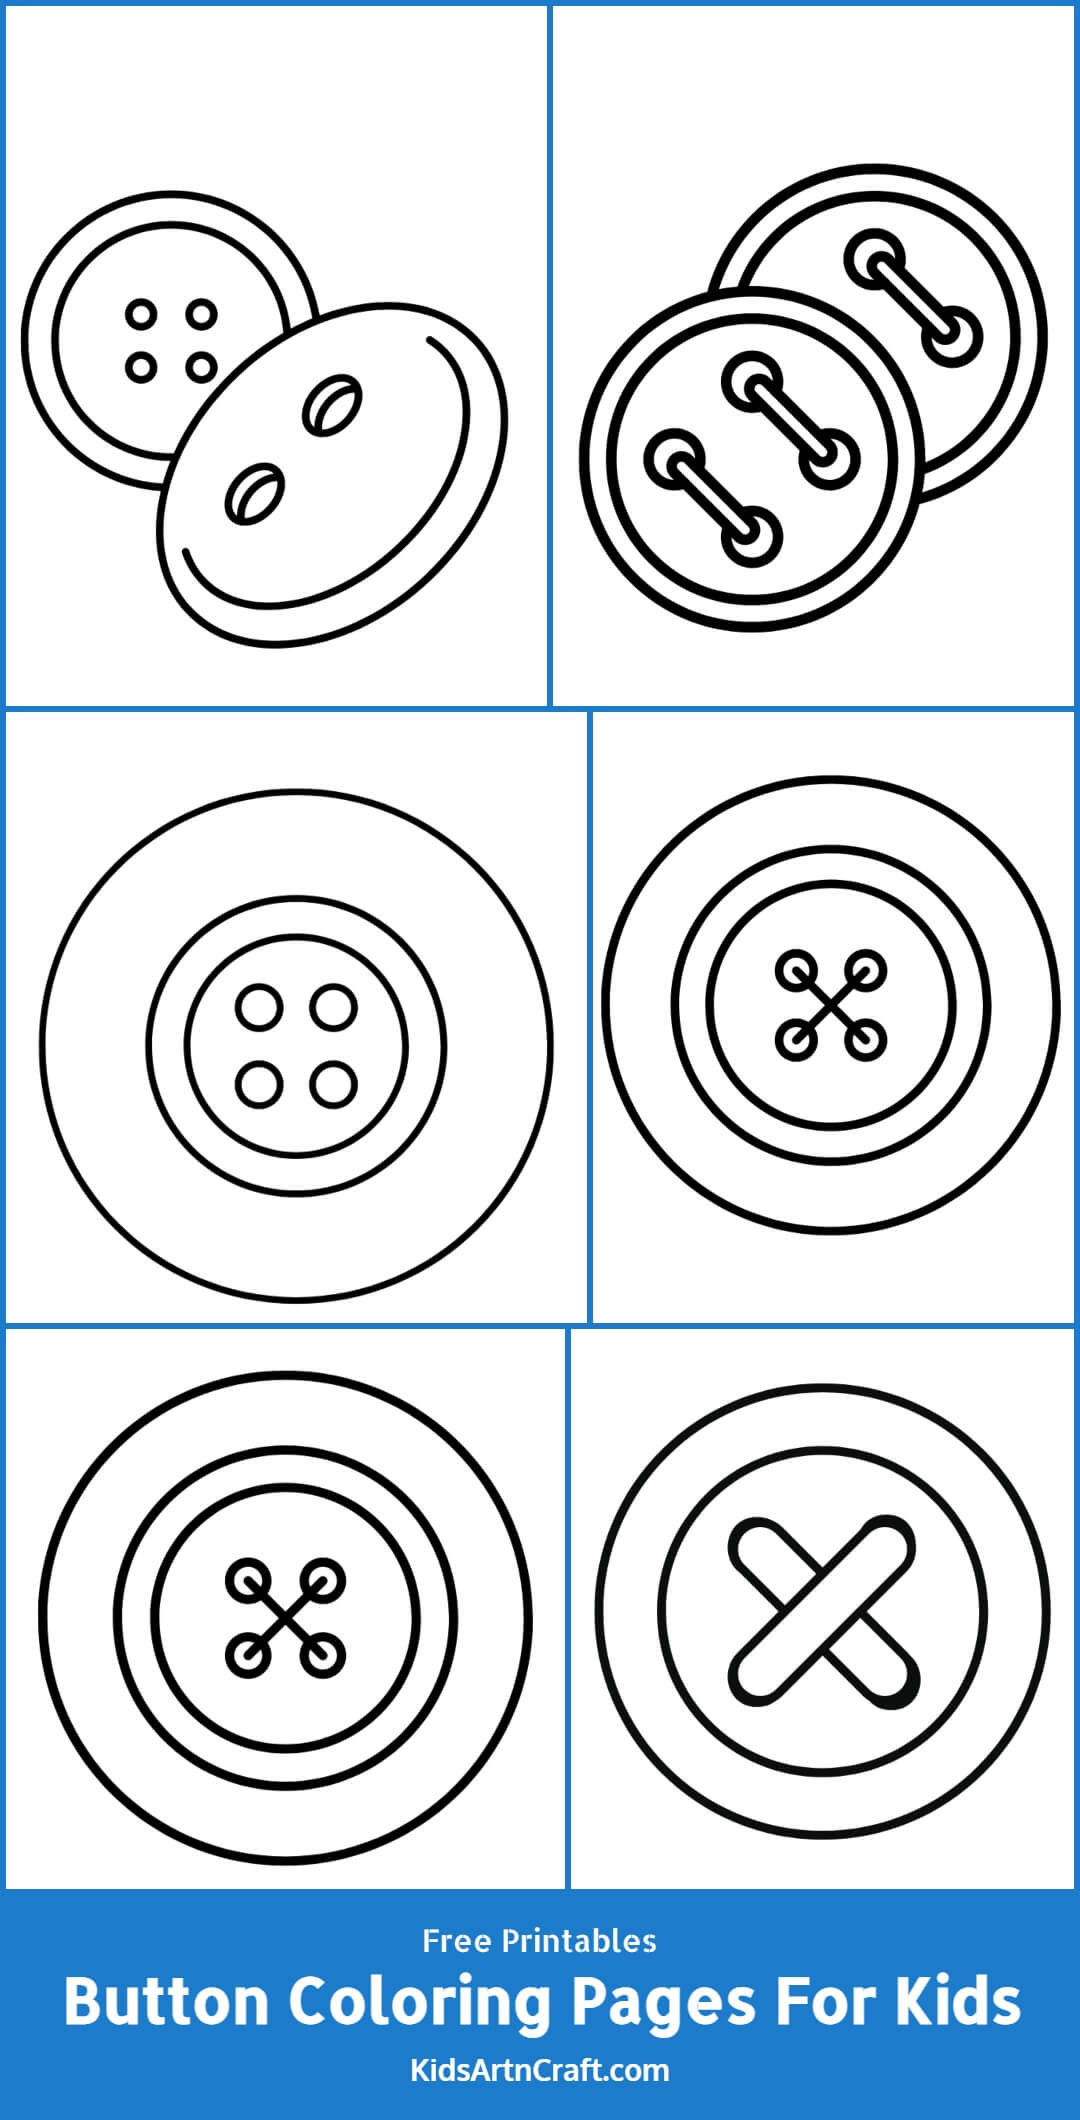 Button coloring pages for kids